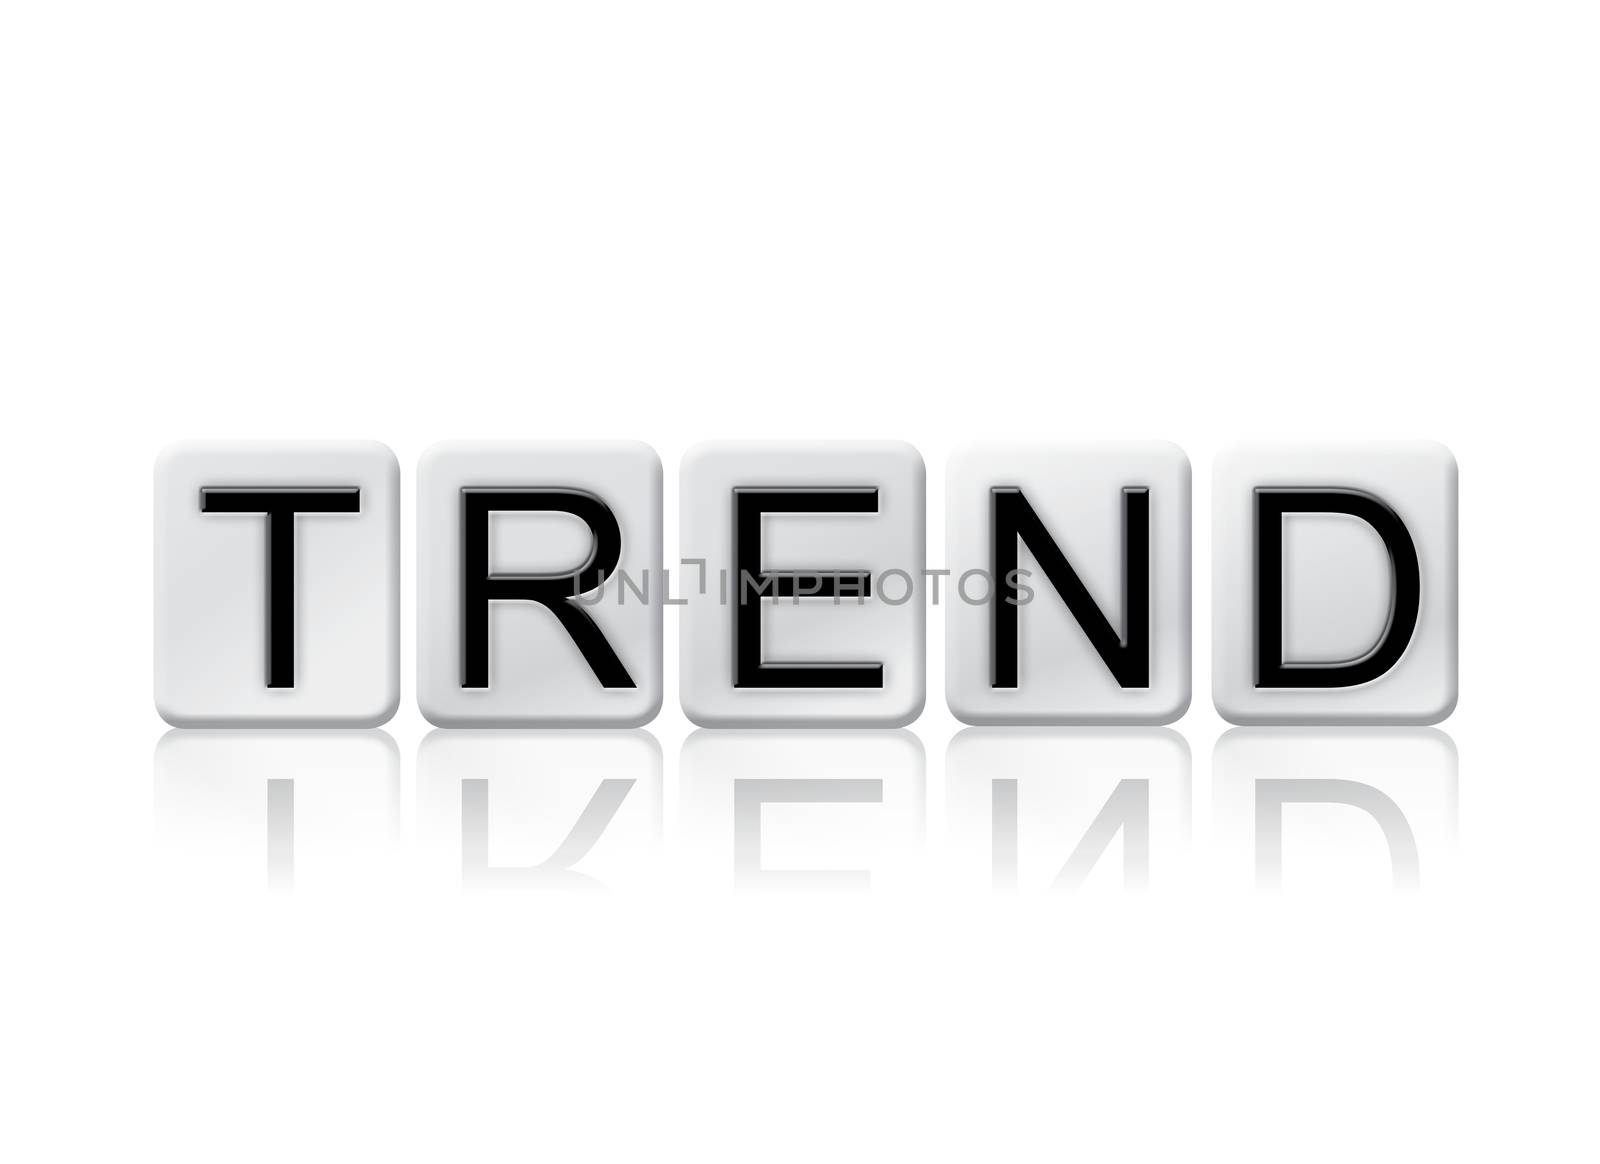 The word "Trend" written in tile letters isolated on a white background.